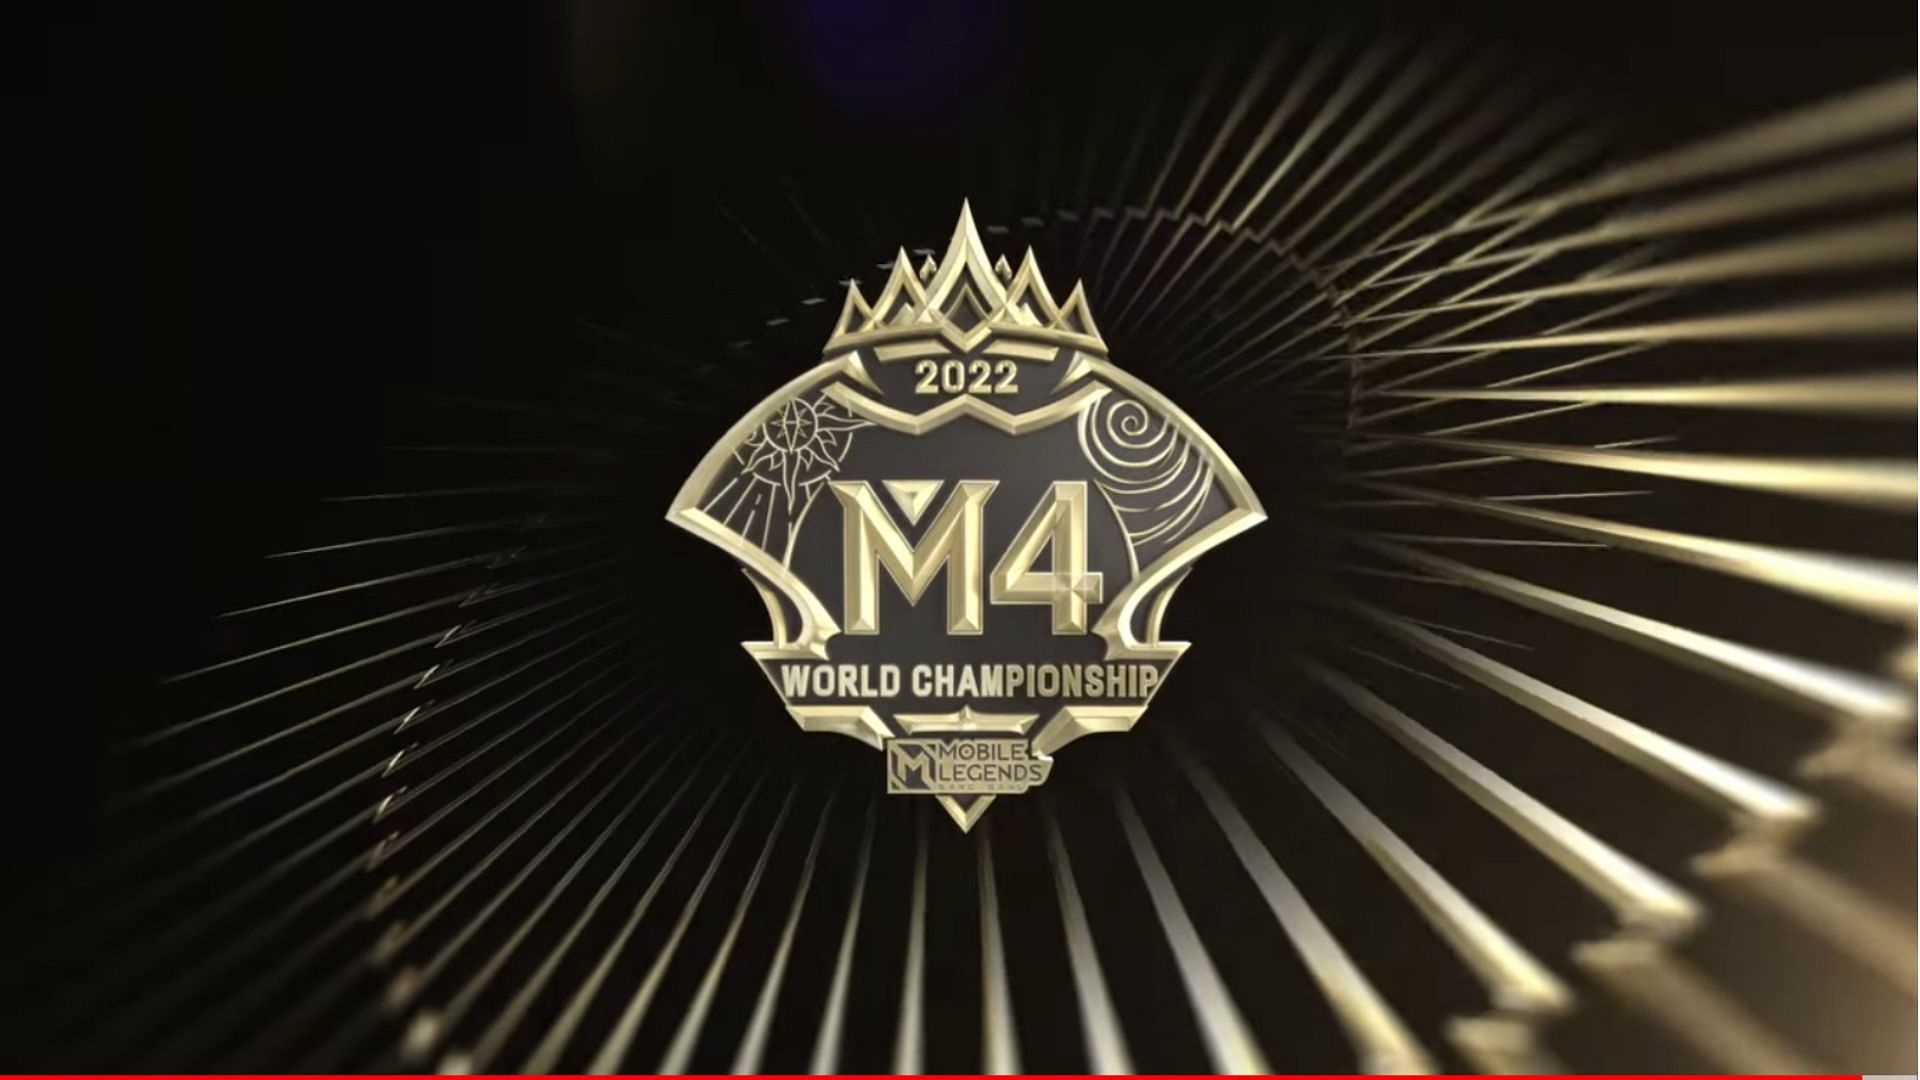 MLBB M4 World Championship Teams, groups, schedule, venue, format, and more